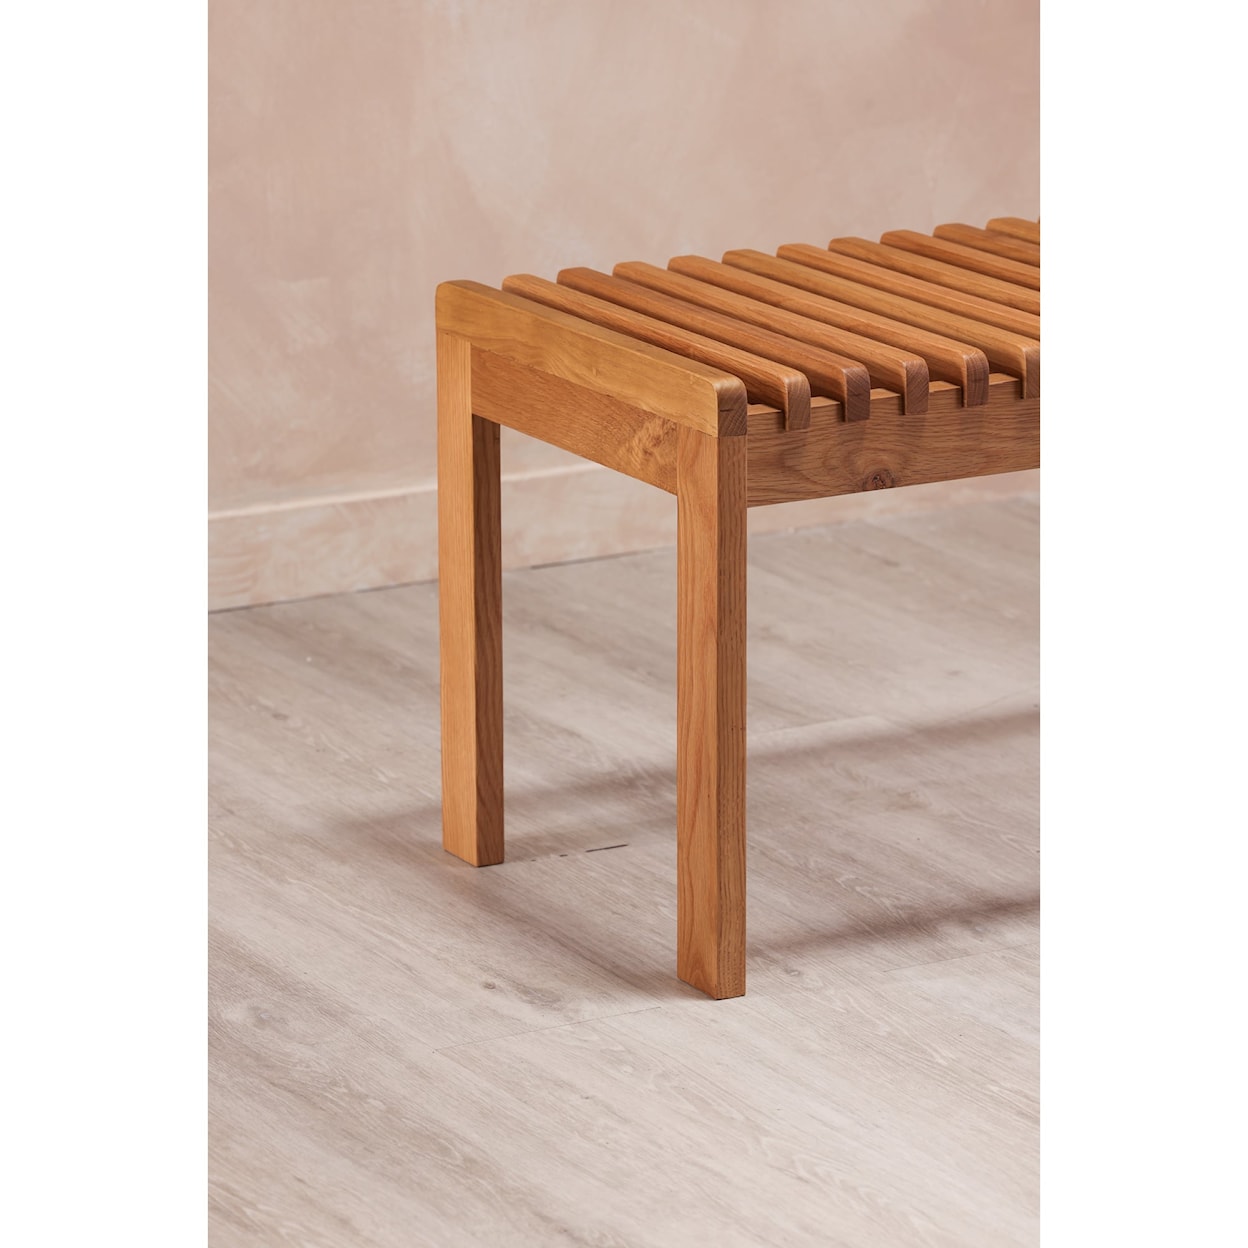 Moe's Home Collection Rohe Accent Bench